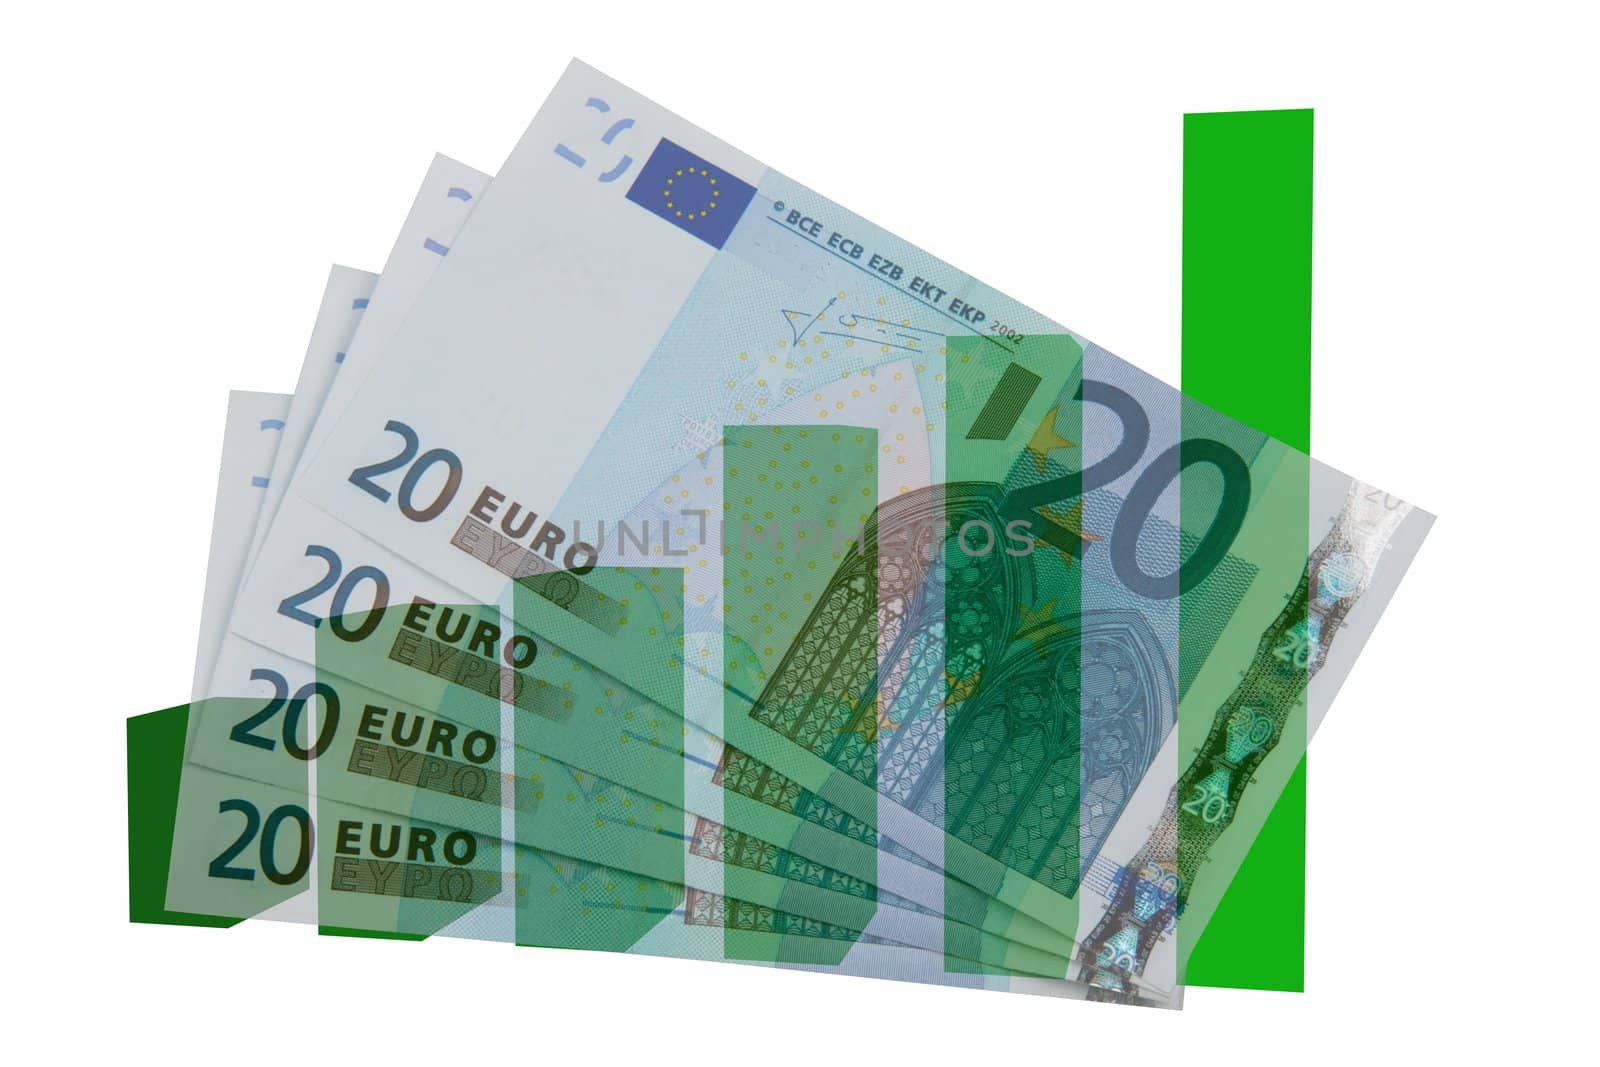 Four 20 euro bills, isolated on white, with green bars on background